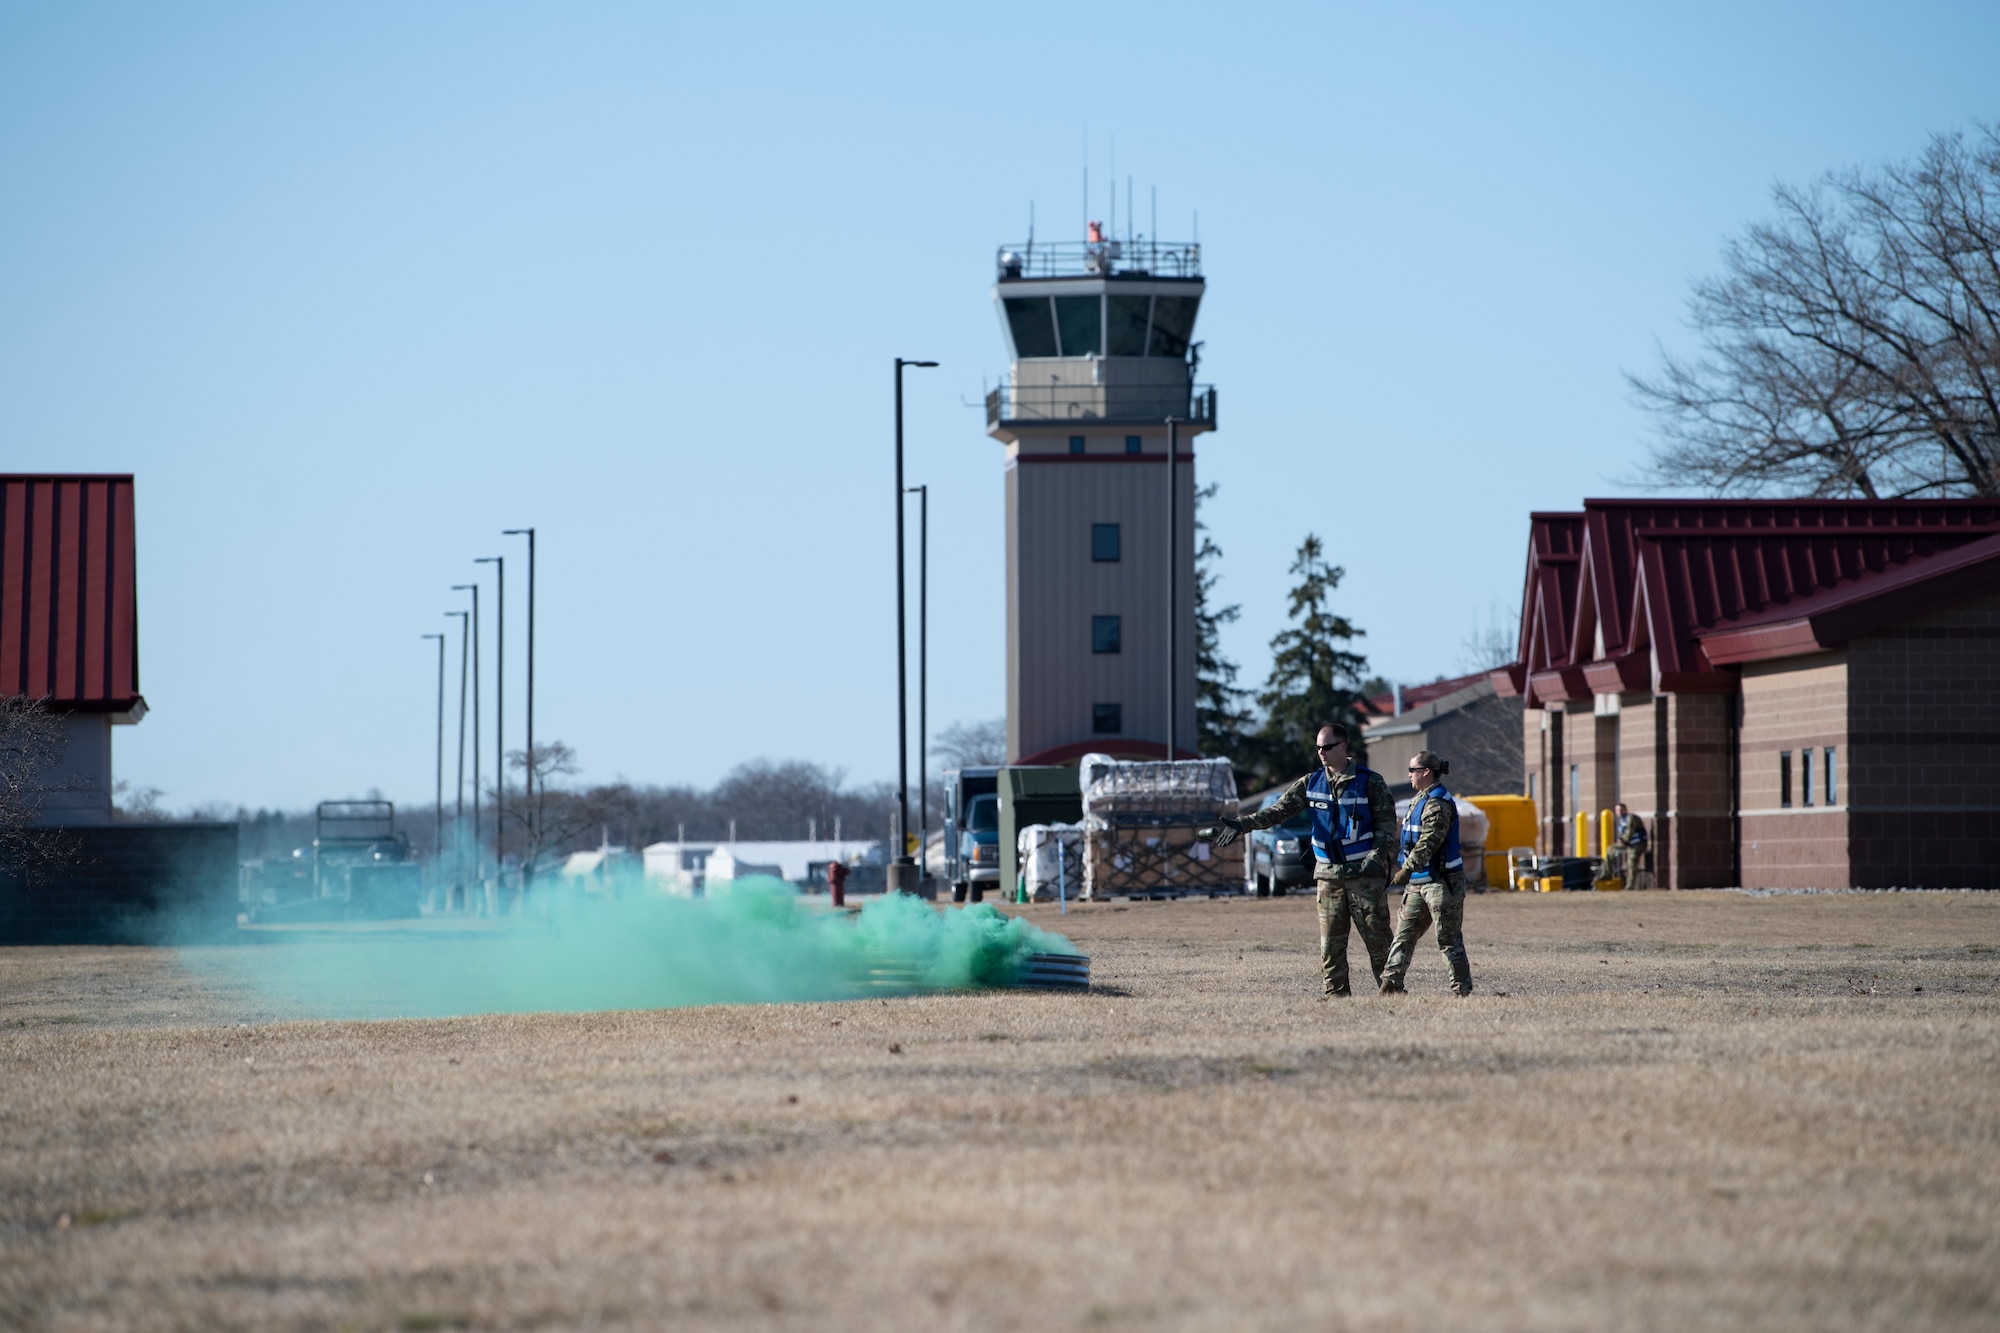 U.S. Air Force Tech. Sgt. Sean Minnis, left, 60th Air Mobility Wing Inspector General team member, throws a green smoke grenade to simulate a chemical attack as fellow IG teammate Staff Sgt. Kristen Patlan observes at the Alpena Combat Readiness Training Center, Alpena, Michigan, April 12, 2022. The Airmen are in a wide open grassy field with a hardened dugout which the smoke grenade is thrown in. In the distance is an air traffic control tower.